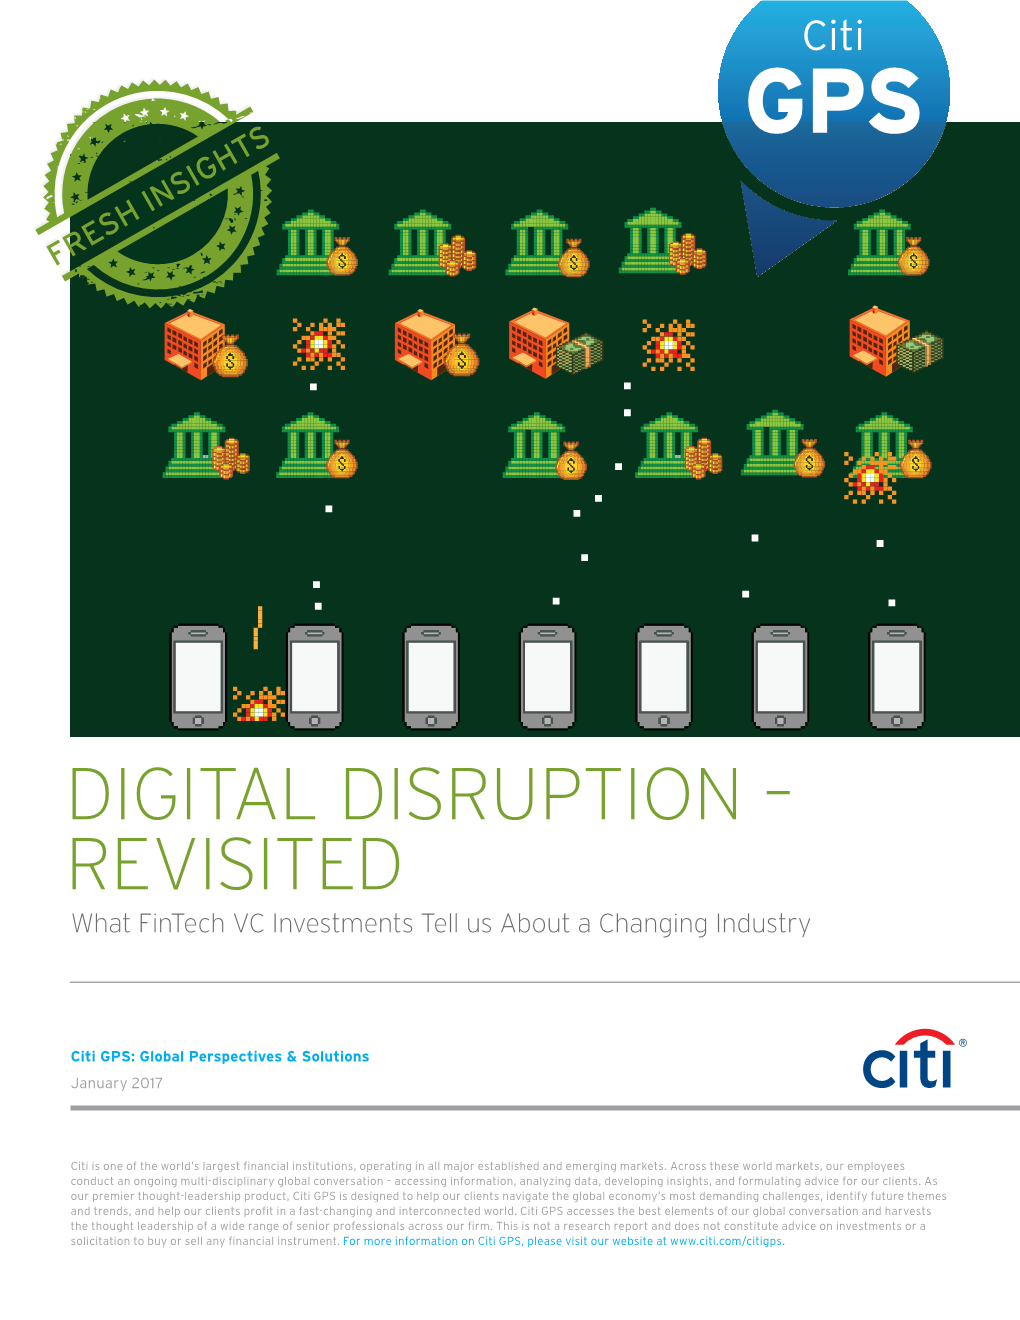 DIGITAL DISRUPTION – REVISITED What Fintech VC Investments Tell Us About a Changing Industry